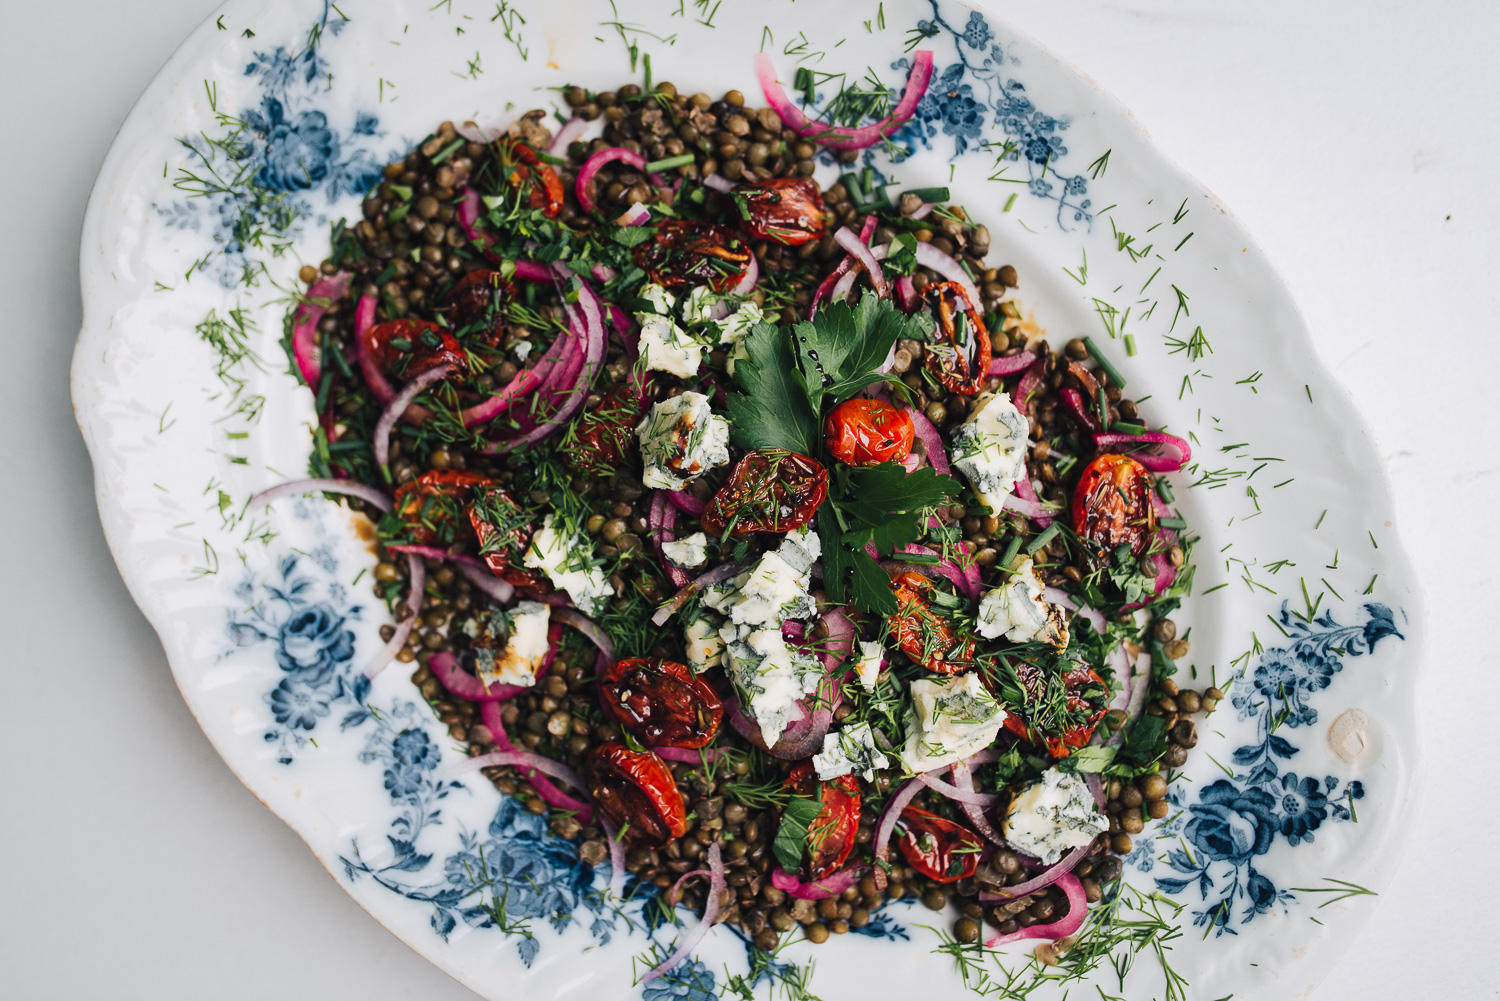 Yotam Ottolenghi's lentil salad with oven-dried tomatoes